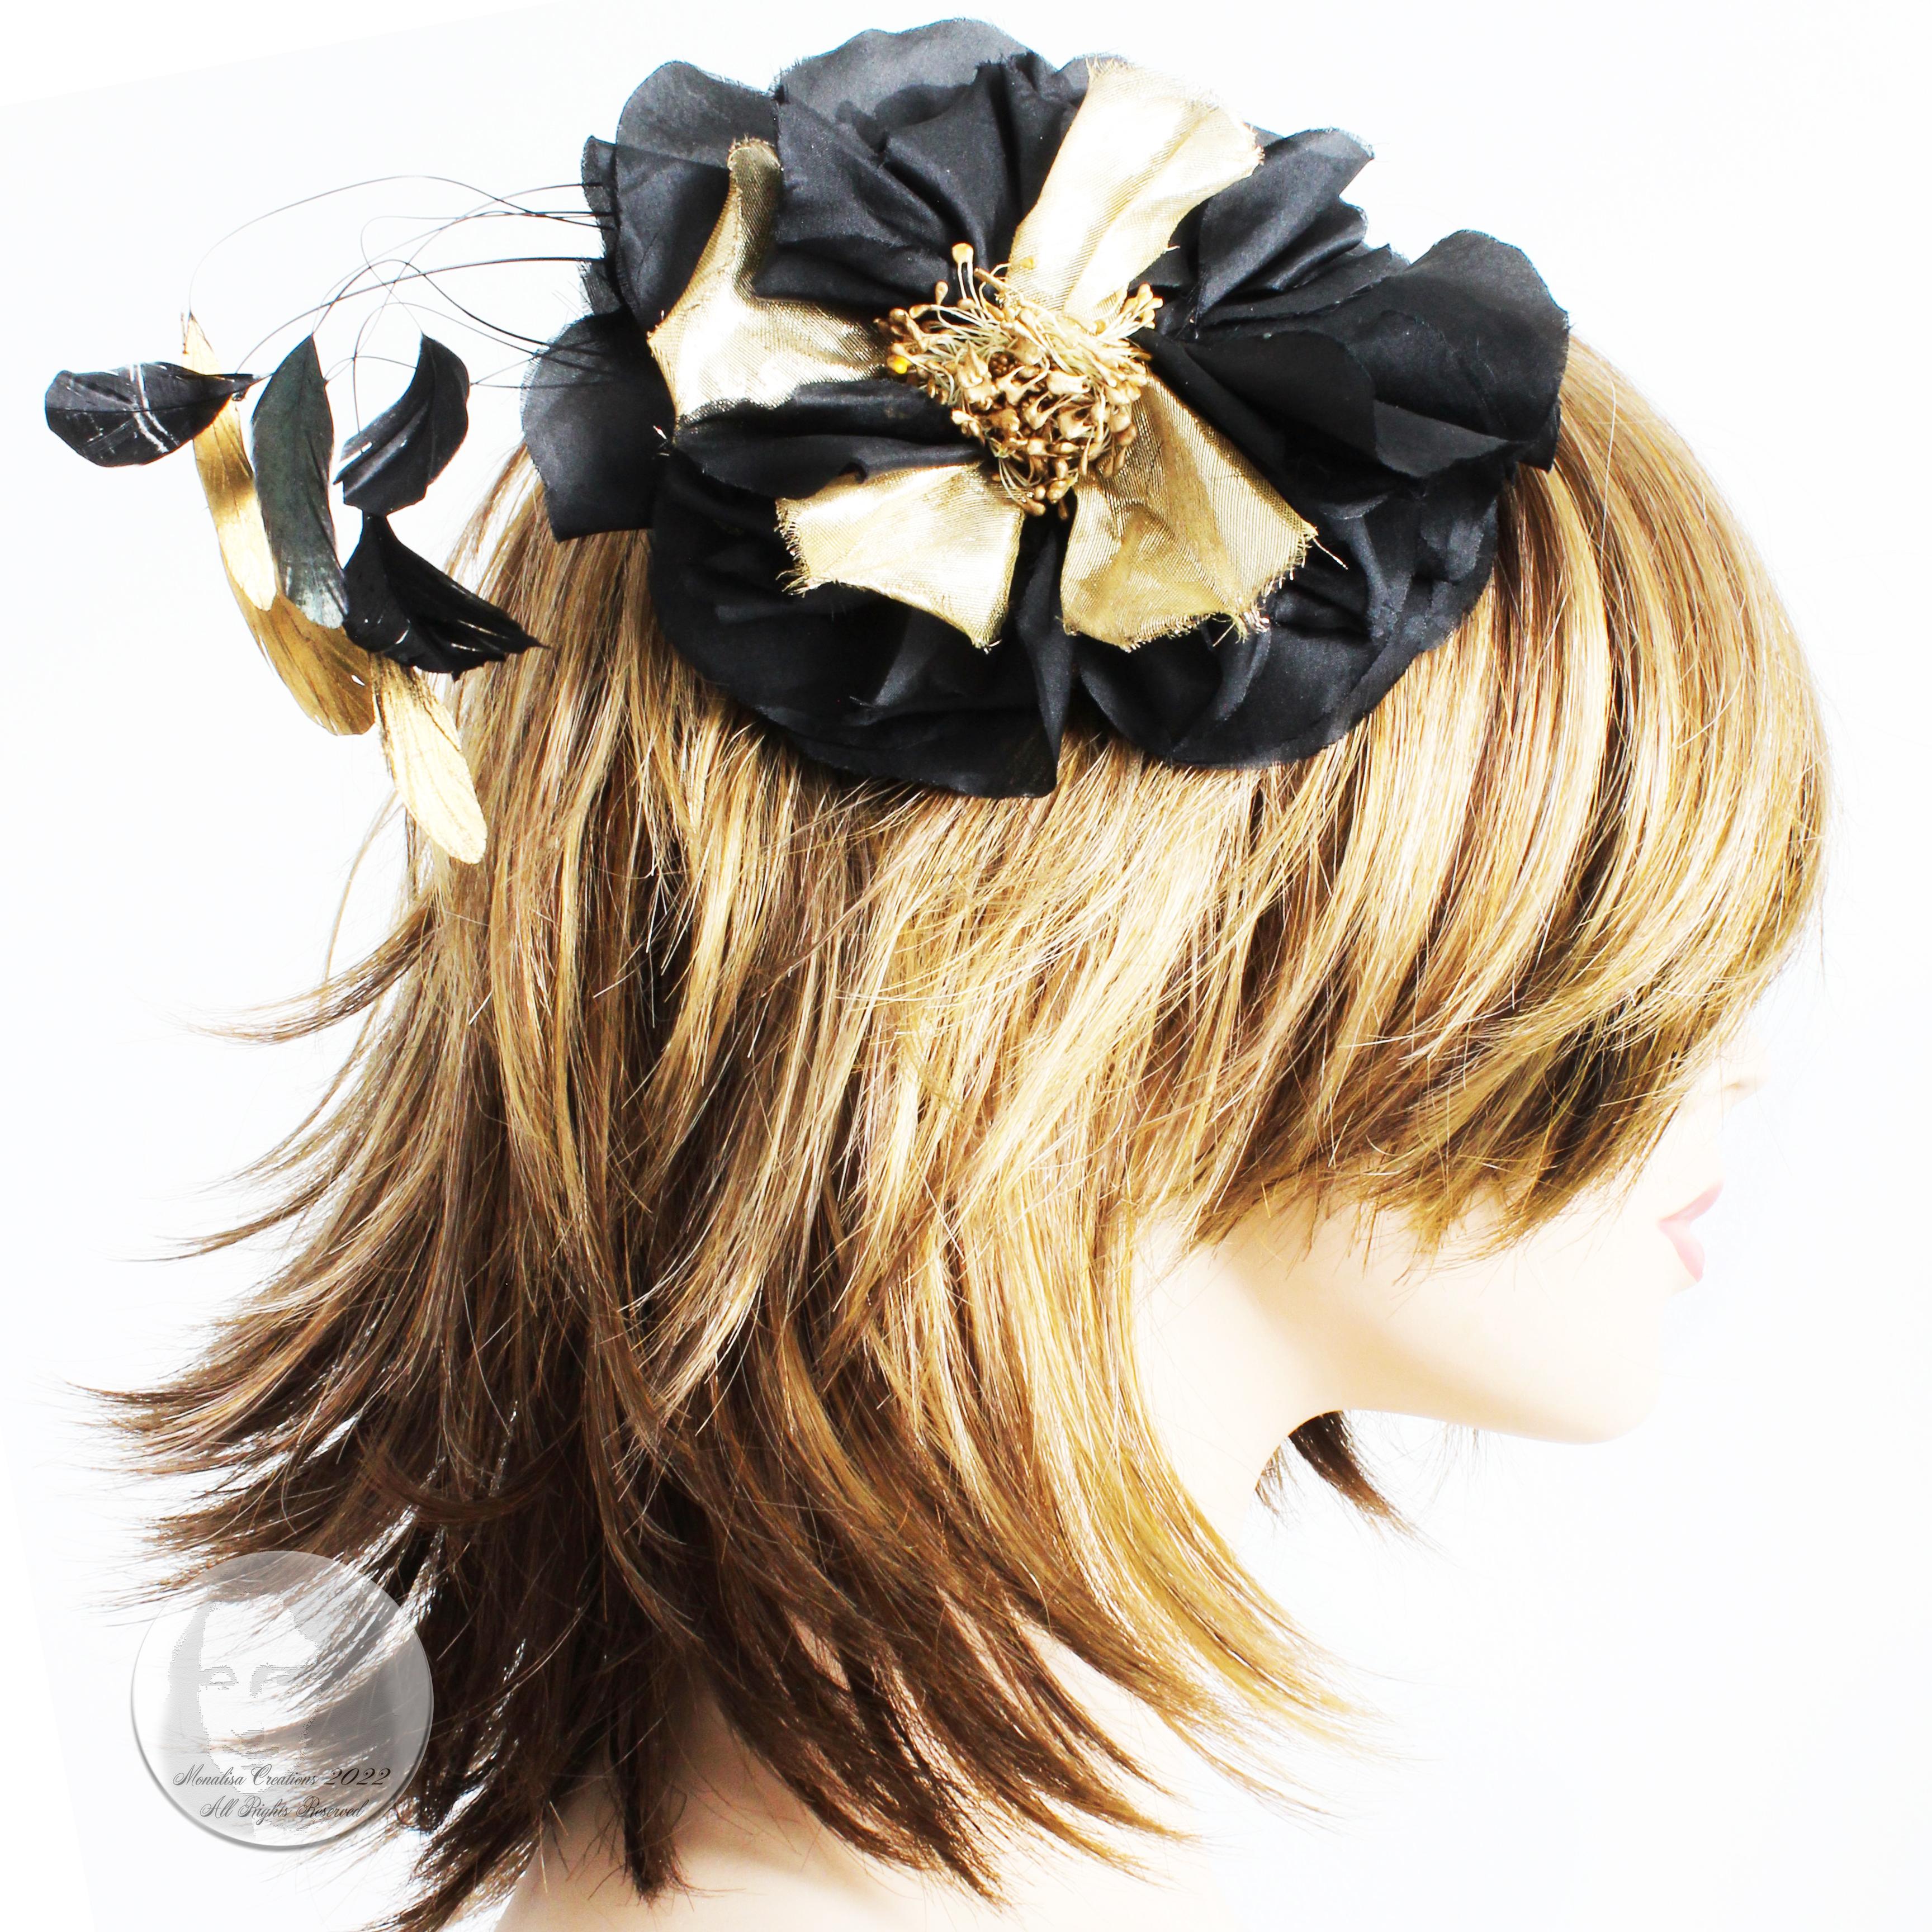 Authentic, preowned, vintage Yves Saint Laurent Rive Gauche decorative floral hair comb or head piece, likely made in the late 70s.  

A gorgeous and super-rare head piece comprised of an oversized flower with black and gold petals, and skinny green